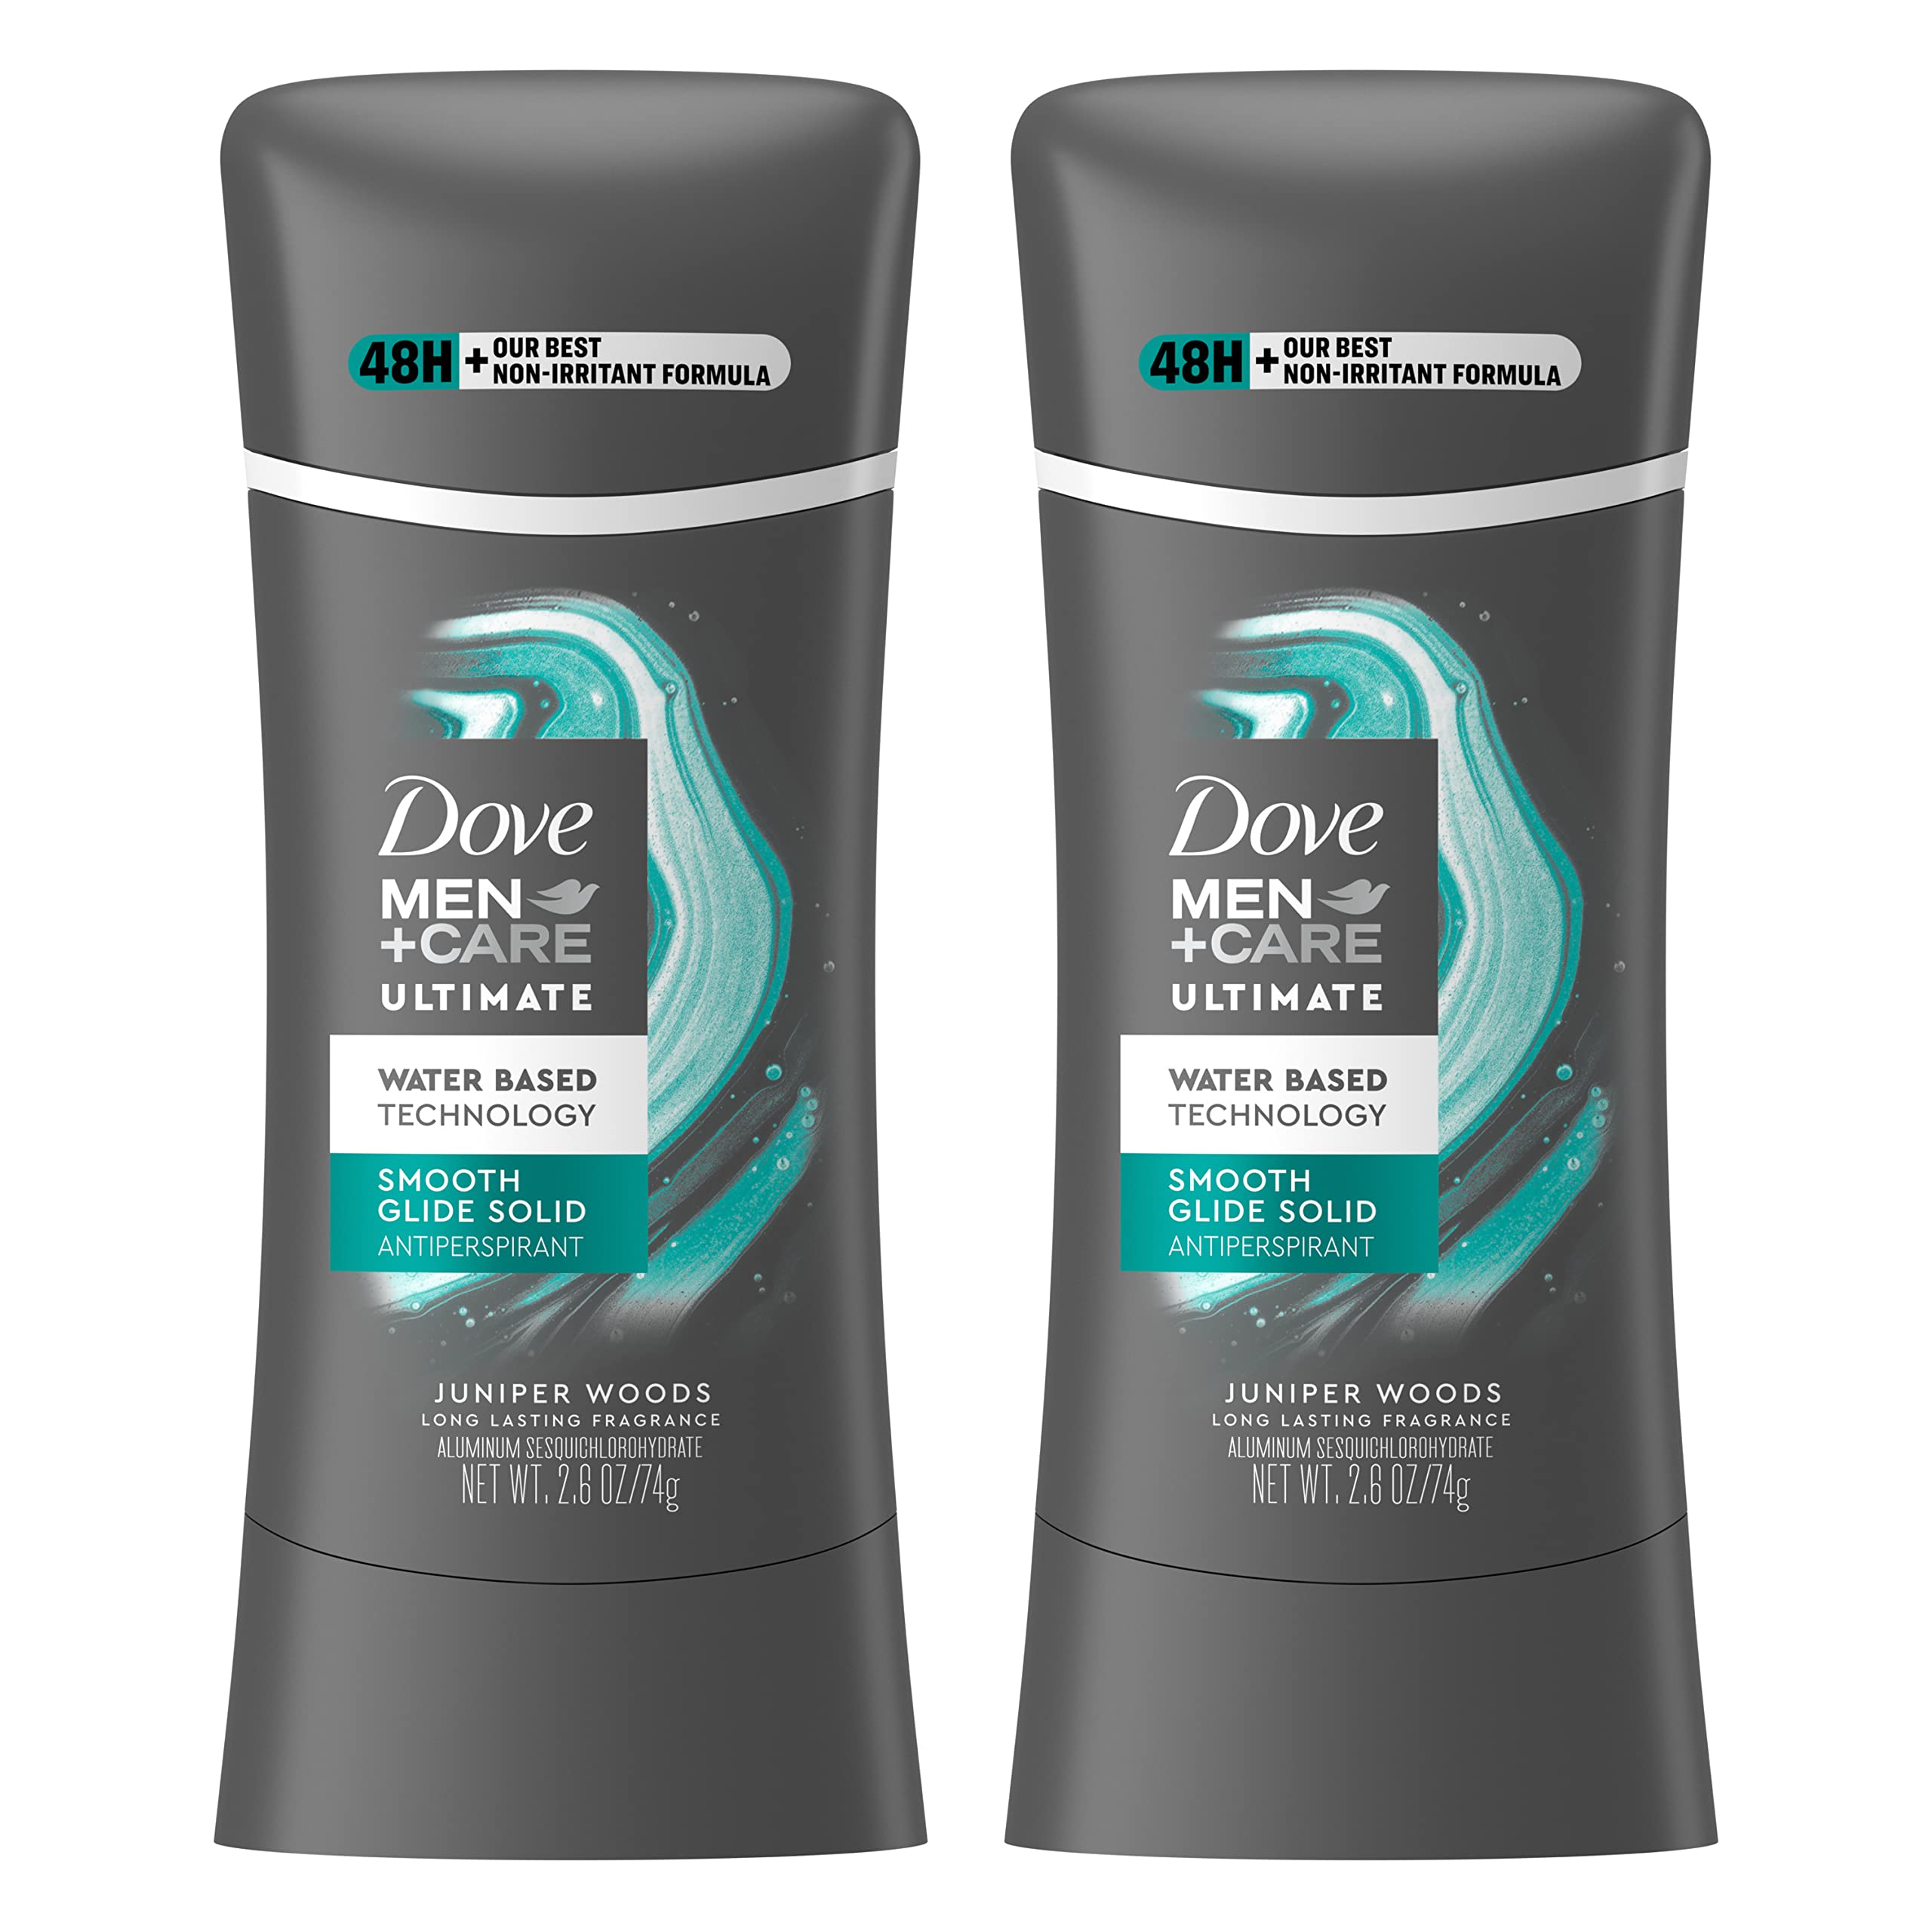 Dove Men+Care Antiperspirant hydrating, water-based deodorant Juniper Woods with our best non-irritant formula 2.6 oz 2 Count